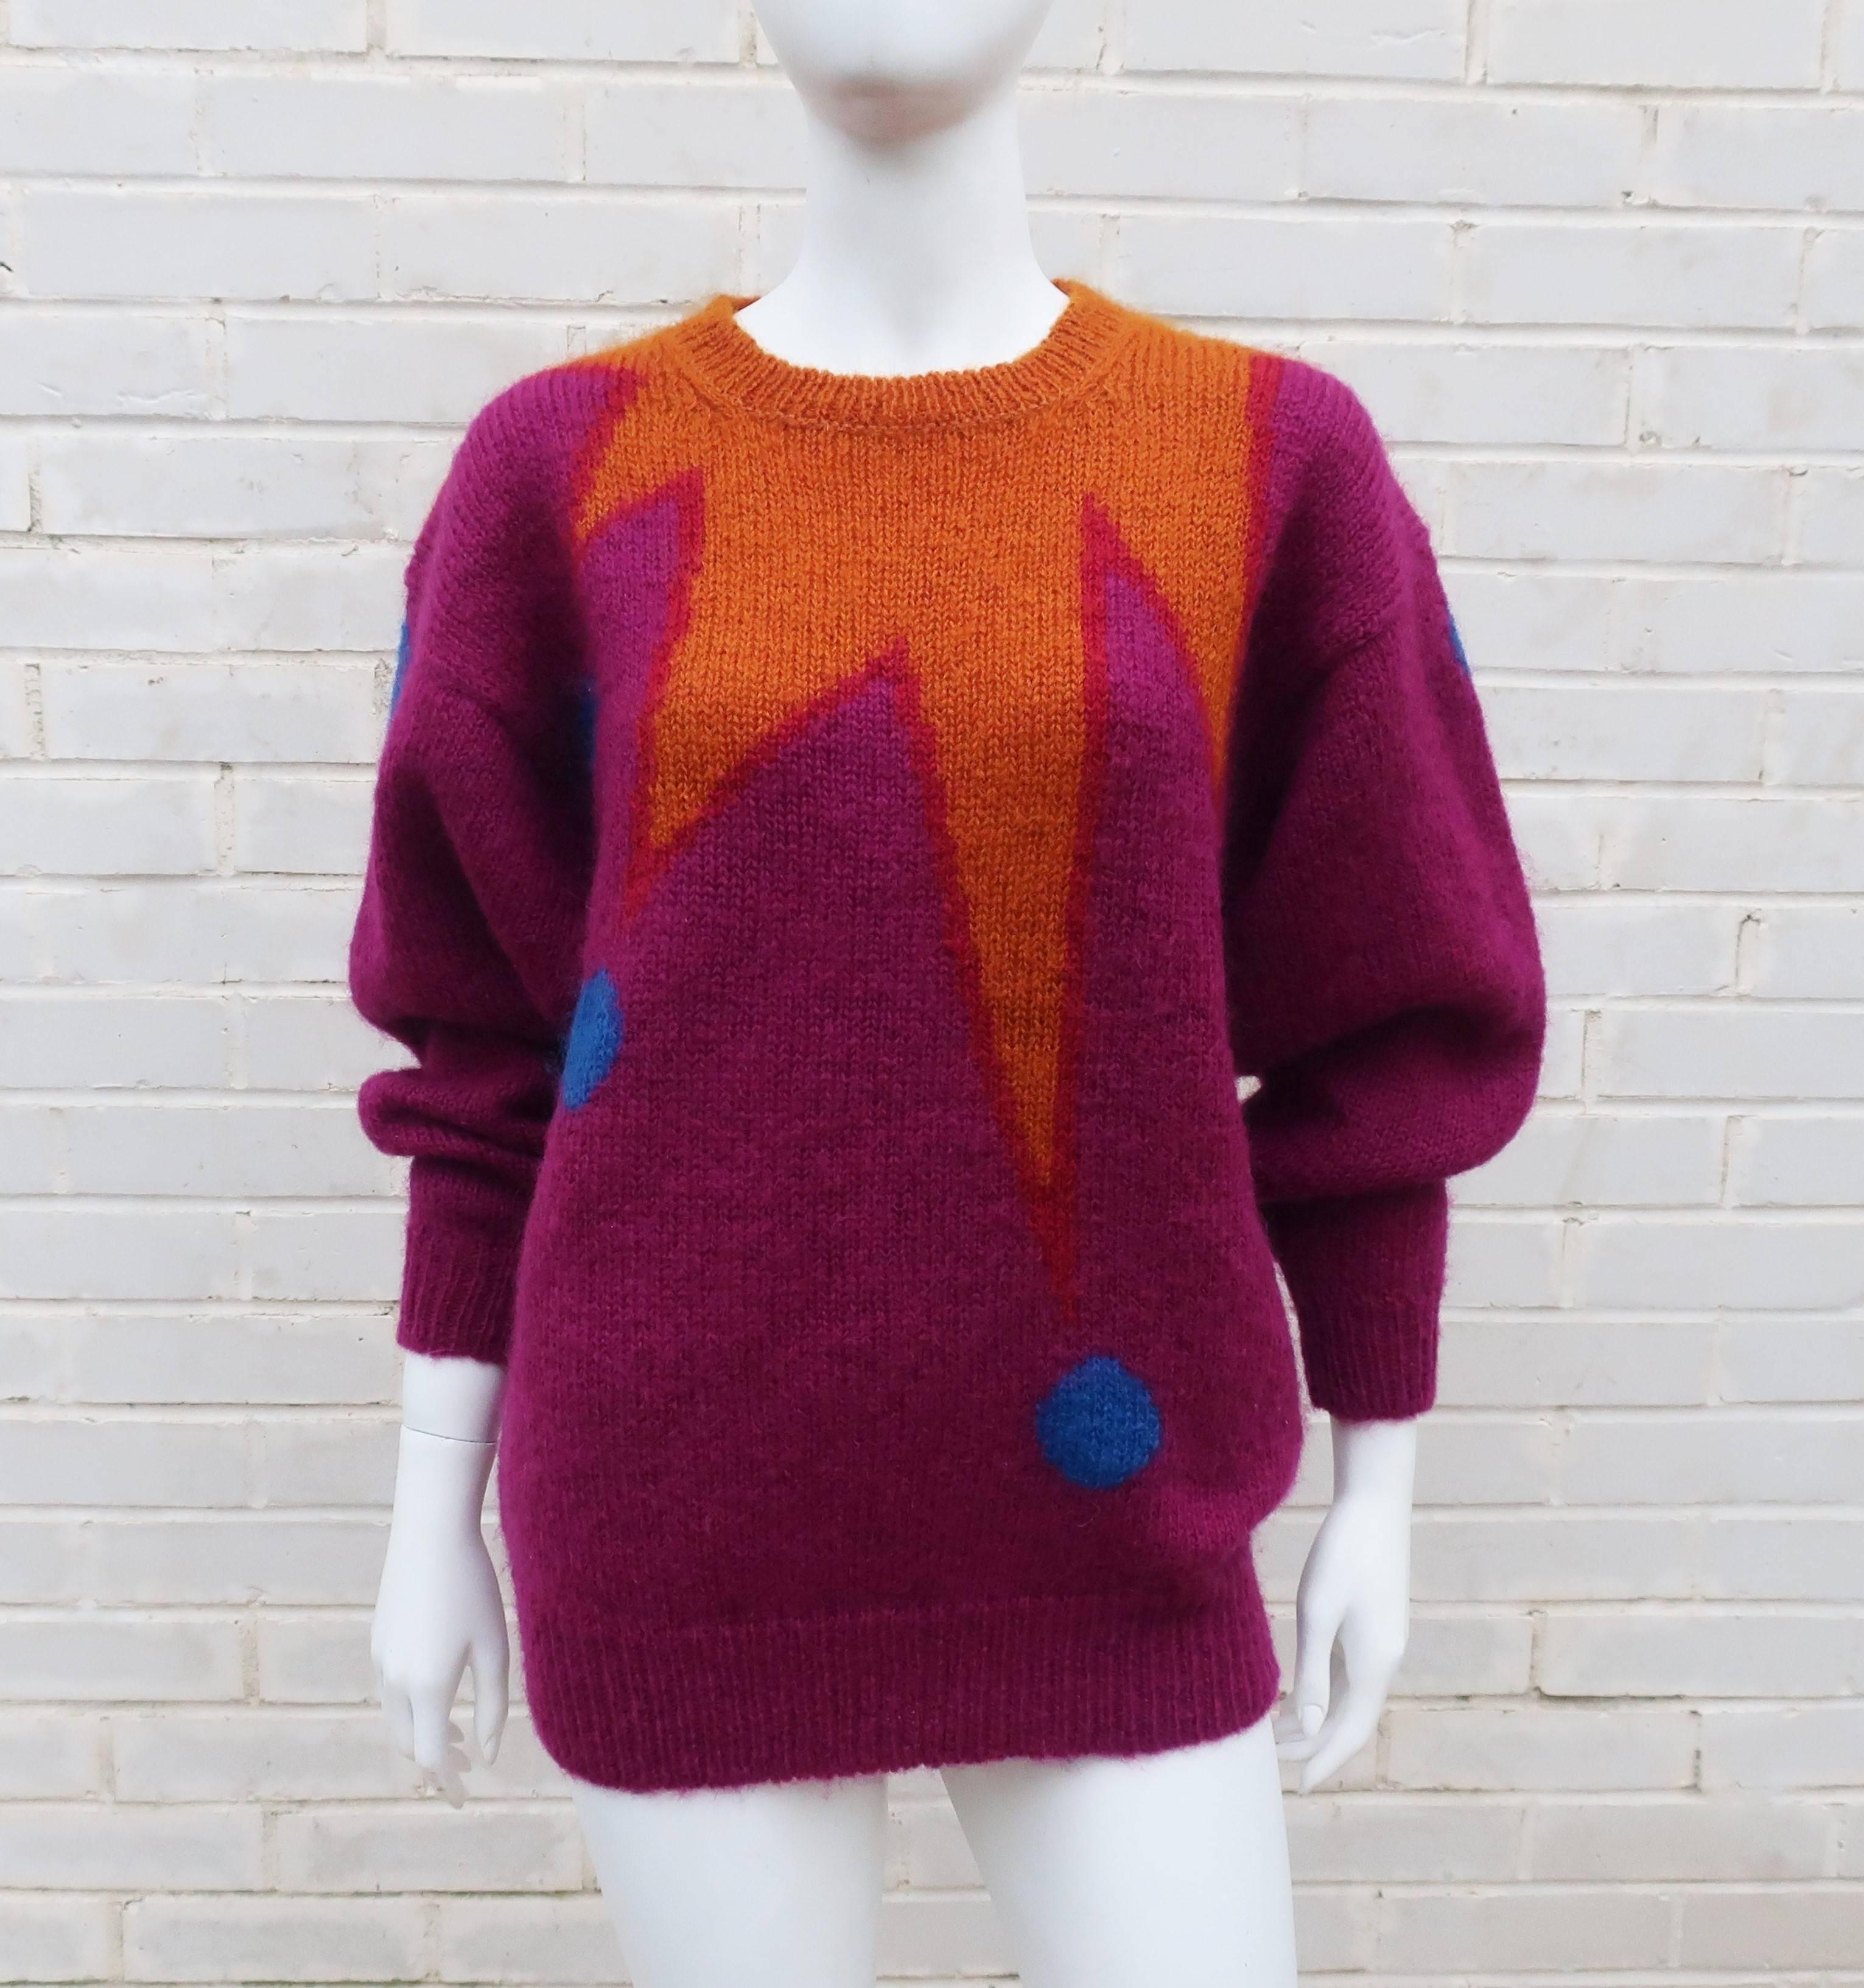 BAM!!!  We're going to call this chunky monkey 1980's design the shazam sweater!  The cozy boyfriend style pullover is made from vibrant mohair in a dark mustard yellow and a deep magenta with plum overtones.  The colors are contrasted with a dark